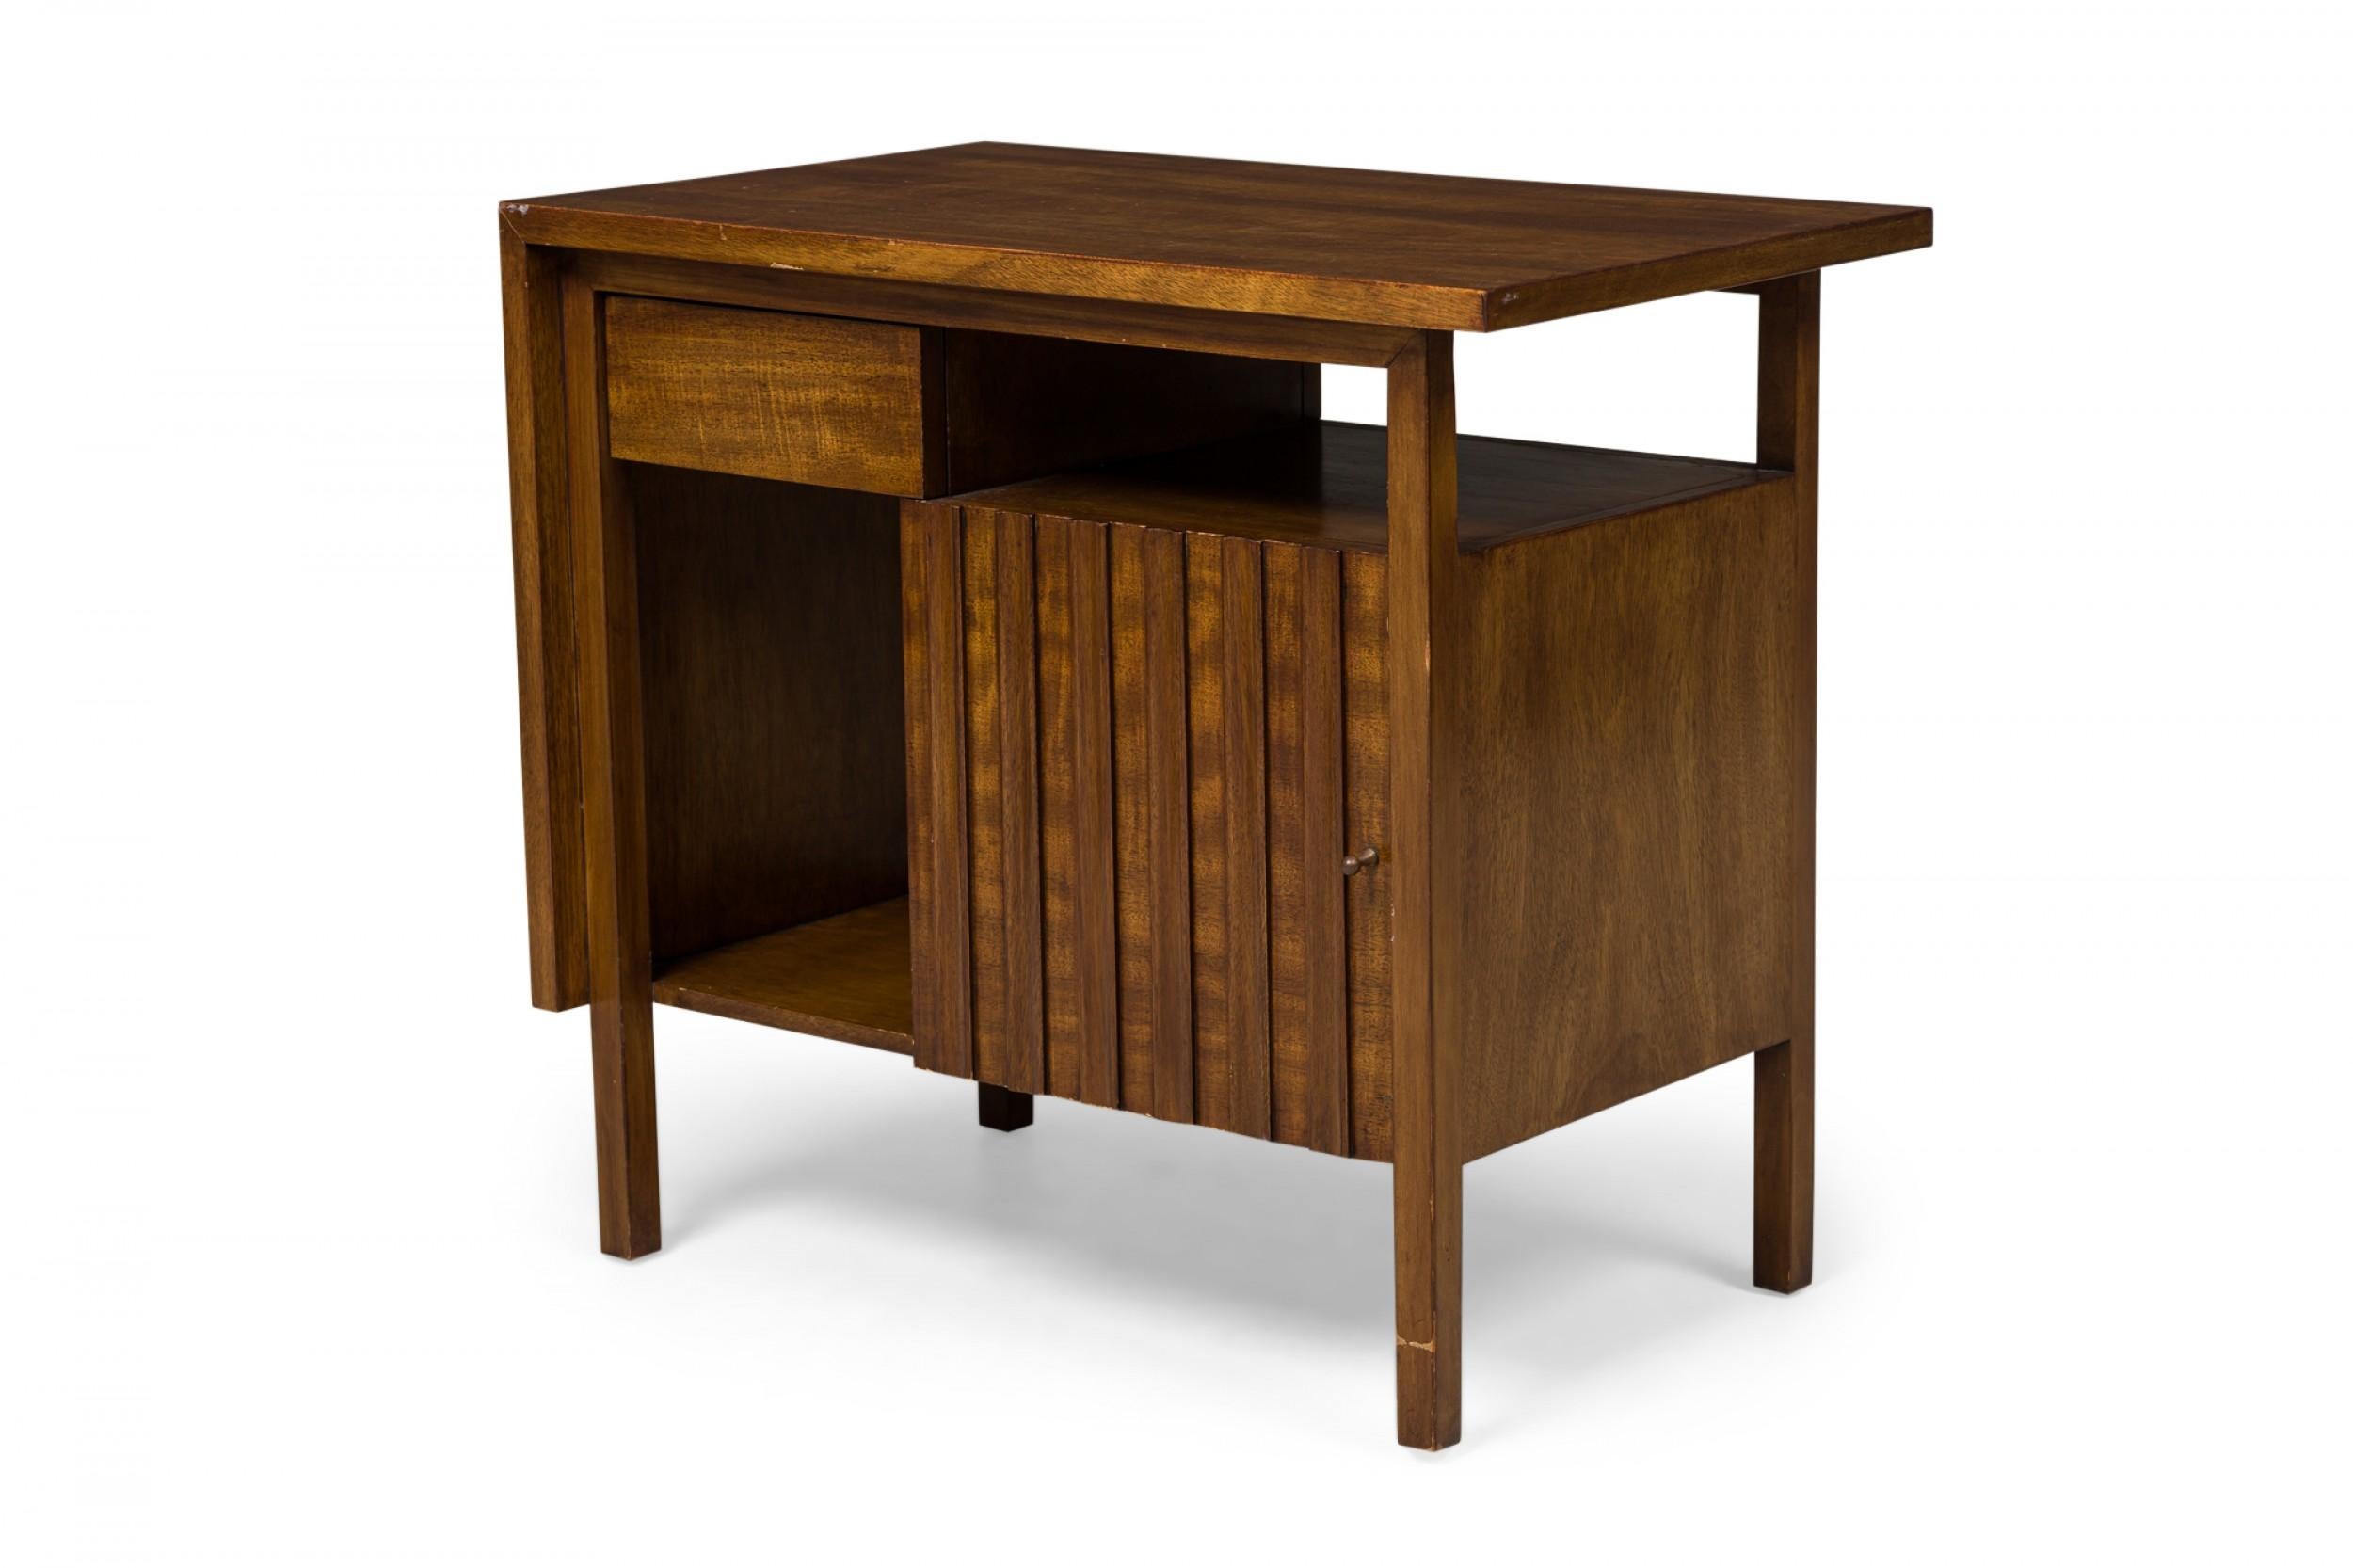 American midcentury walnut bedside table / end table with a single drawer to the left of an open compartment over a mirrored base arrangement comprised of an open cabinet and a larger closed cabinet that opens to the right with a slat front door,